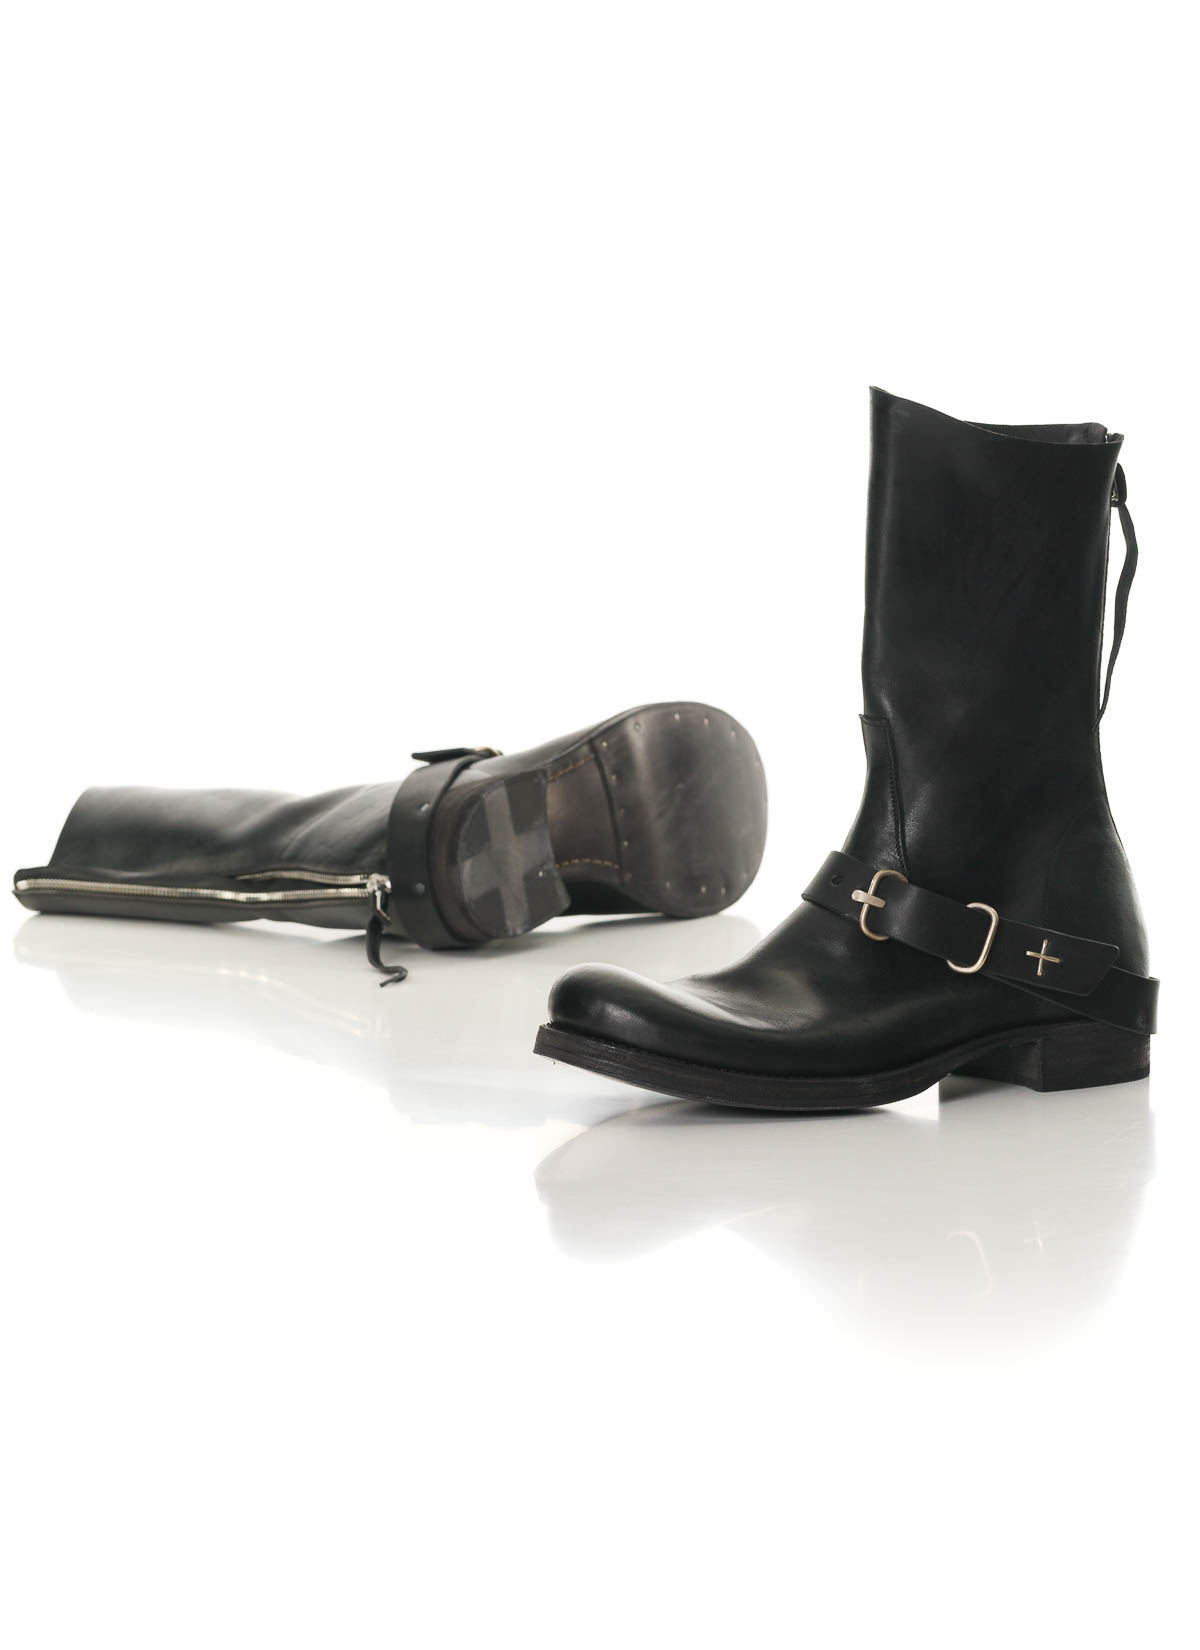 hide-m | M.A+ Maurizio Amadei Tall Buckle Back Zip Boot S1C3Z, black